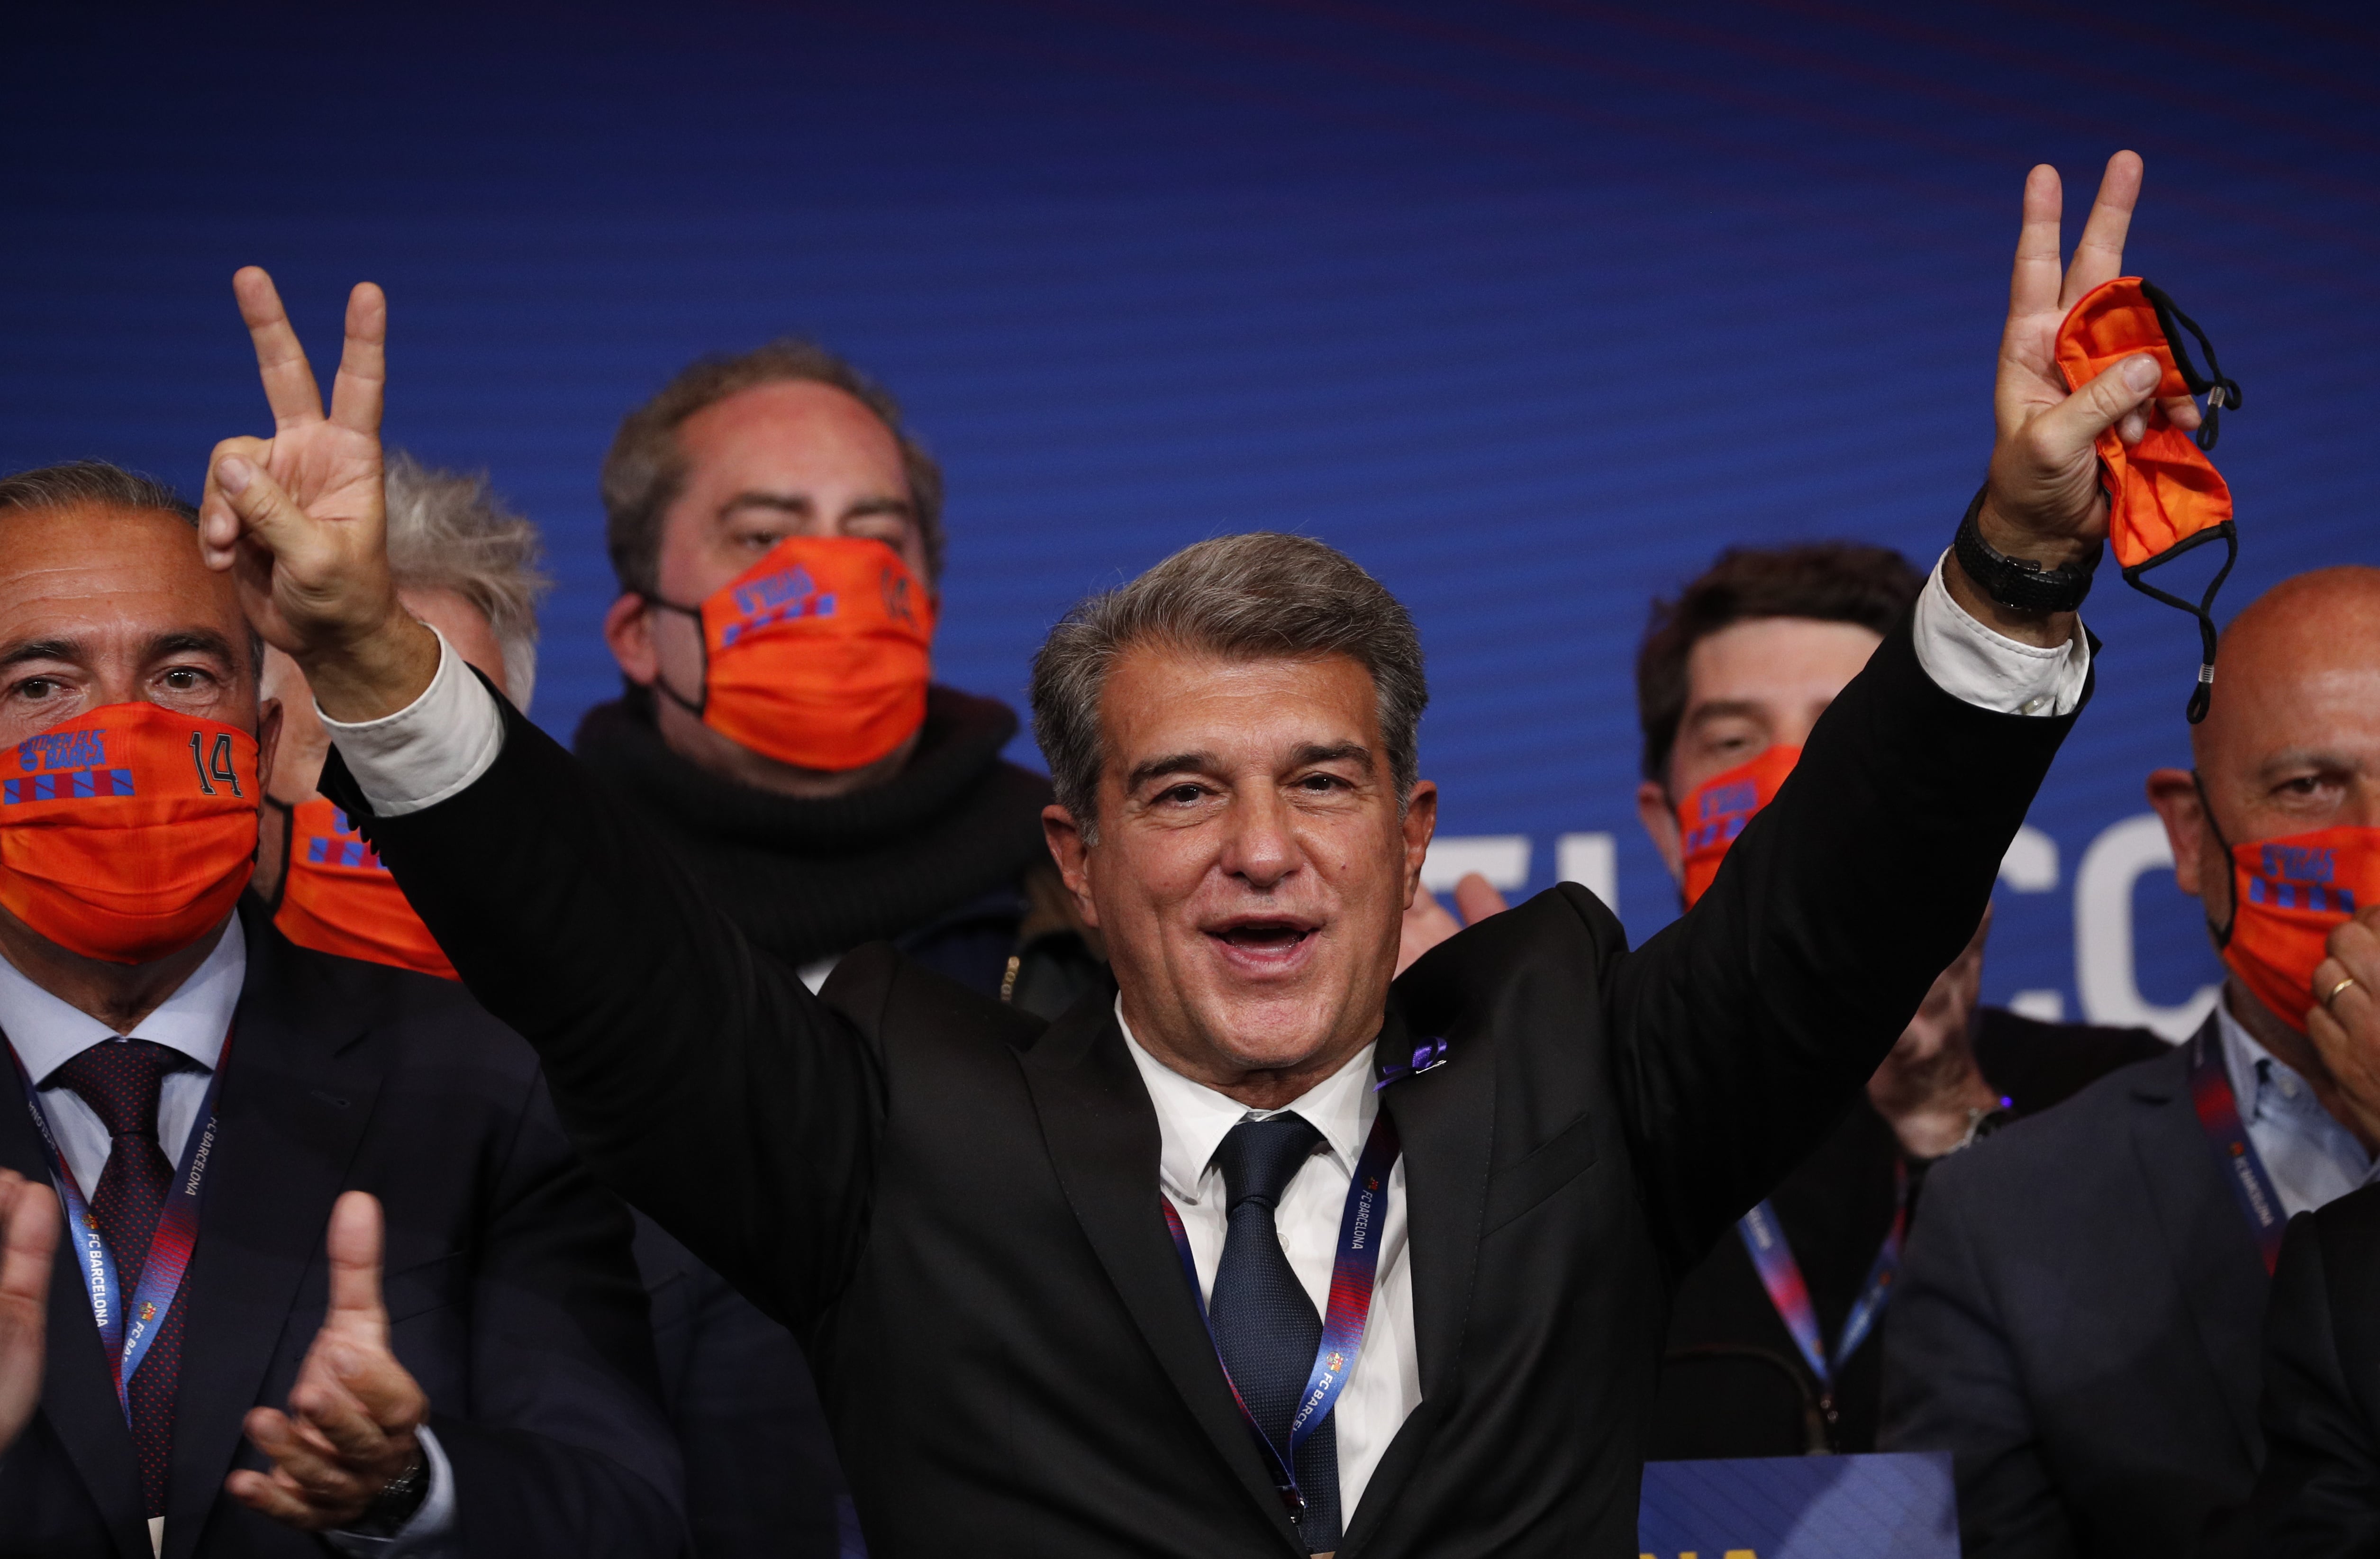 Newly elected president of FC Barcelona, Joan Laporta (image by REUTERS/Albert Gea)